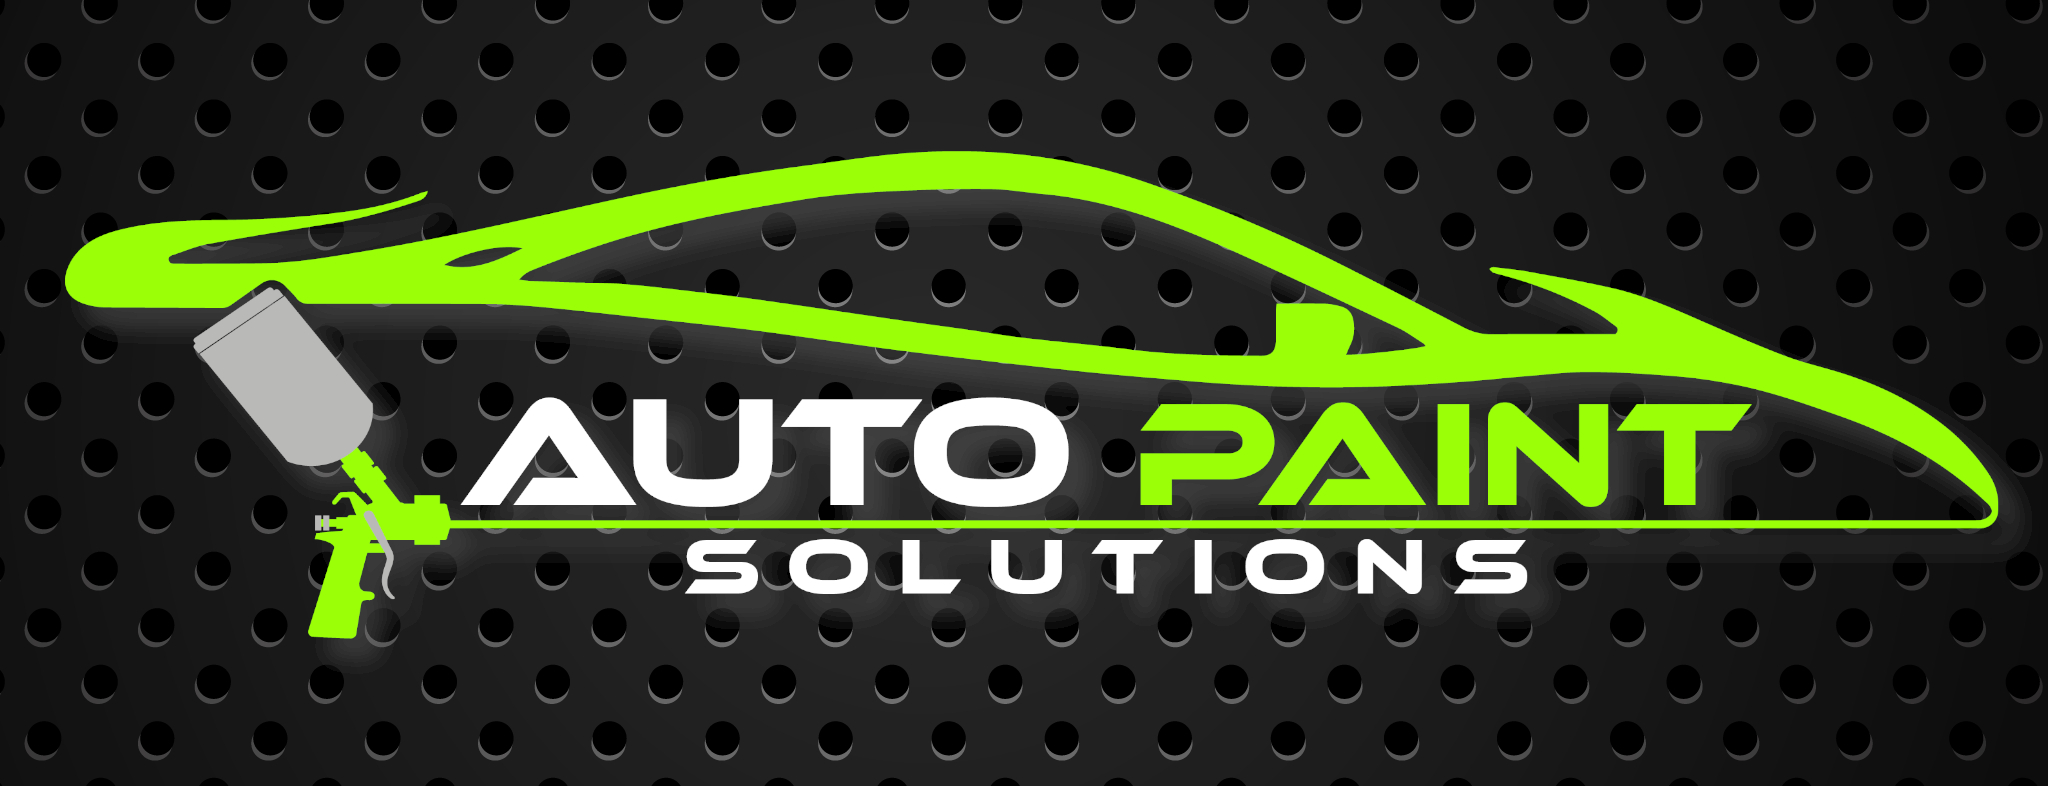 Auto Paint Solutions | By Fourth Dimension Logo Design